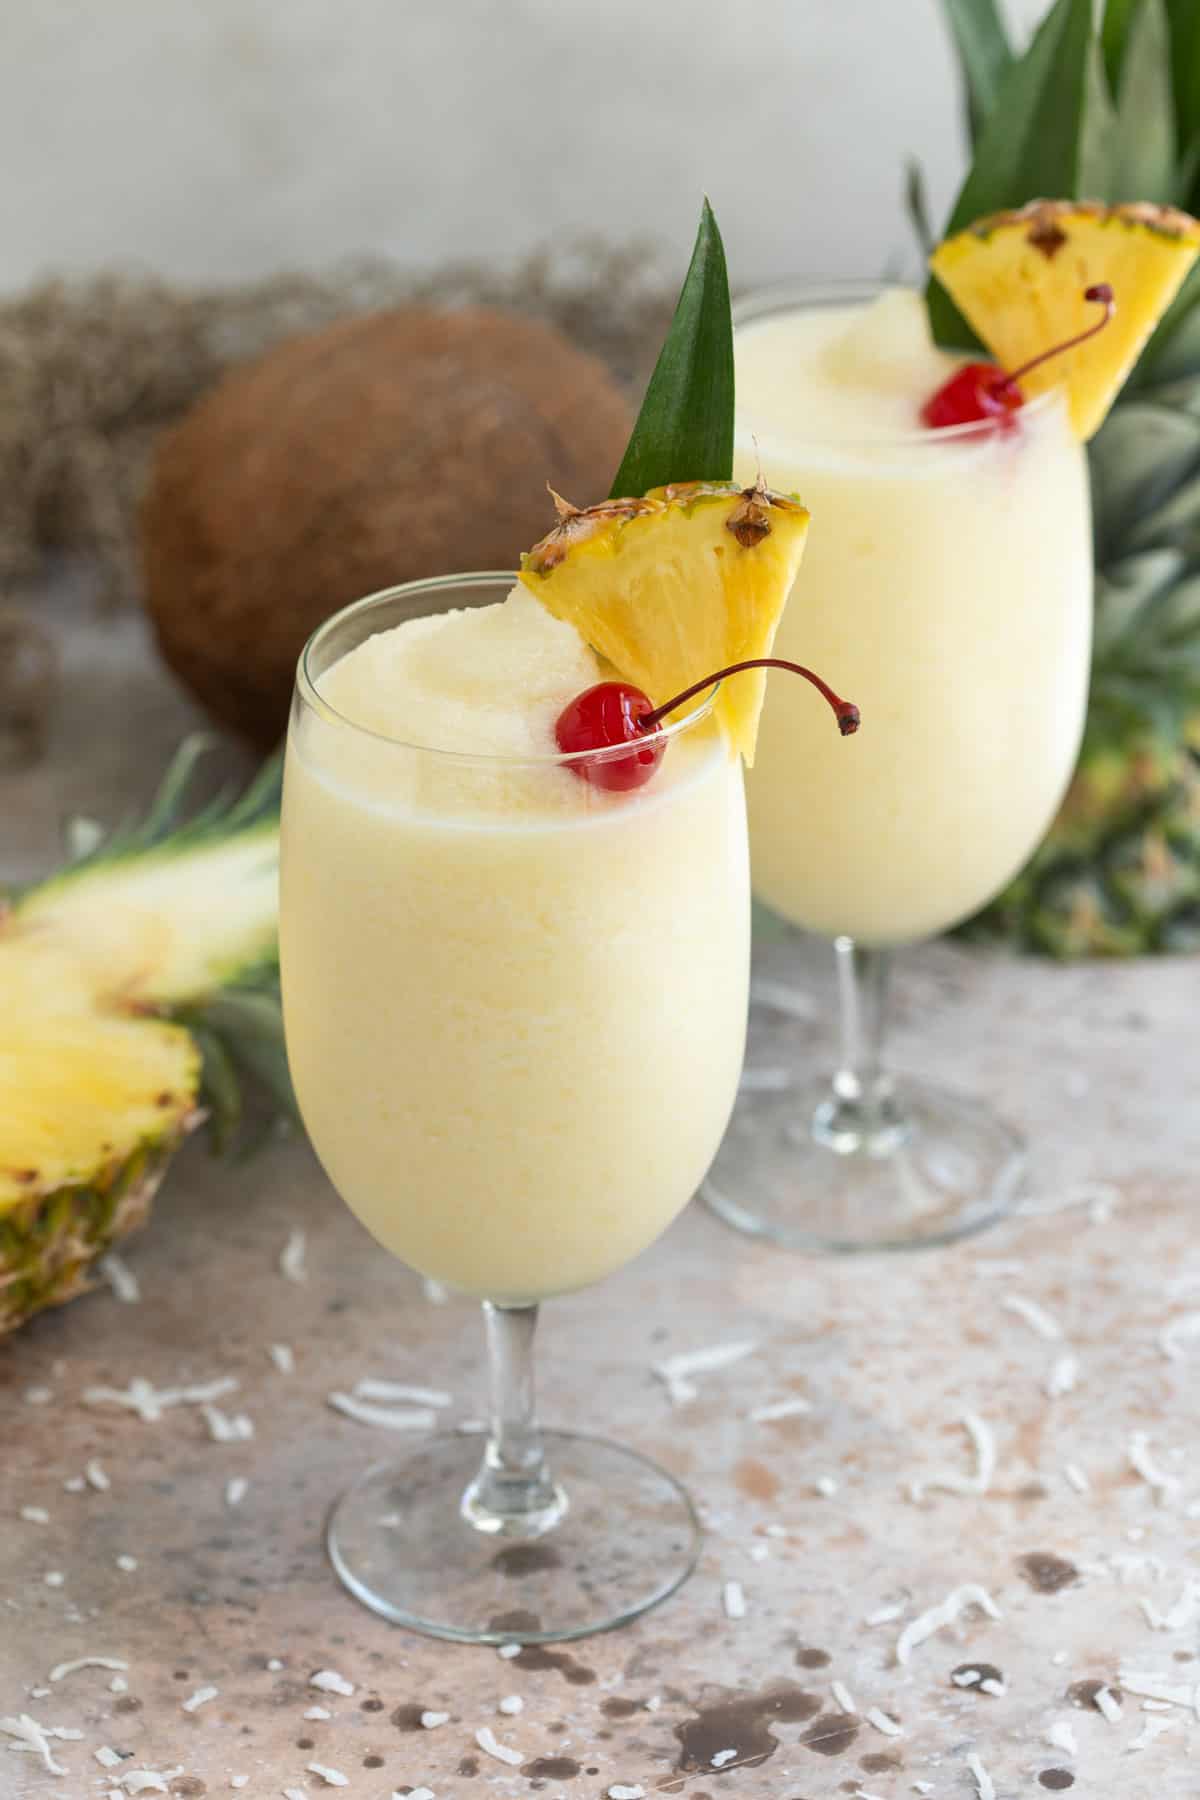 Two frozen pina coladas garnished with a pineapple wedge and a maraschino cherry.